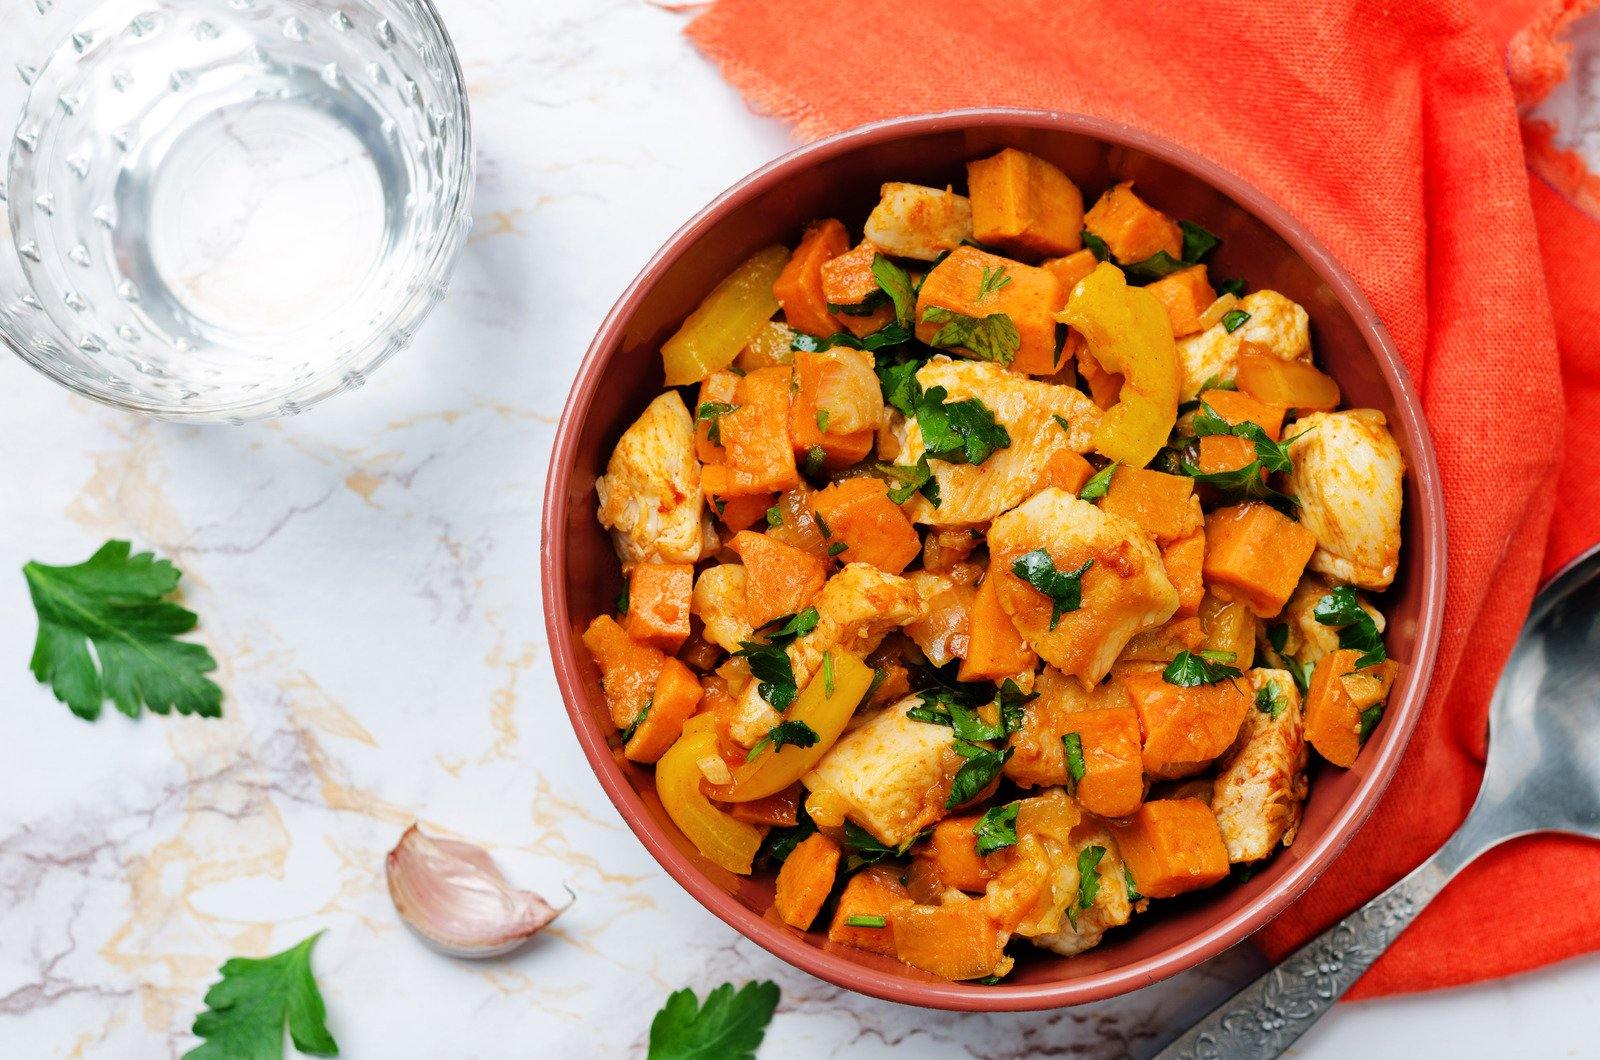 Sweet potatoes in a healthy meal for pregnant women.